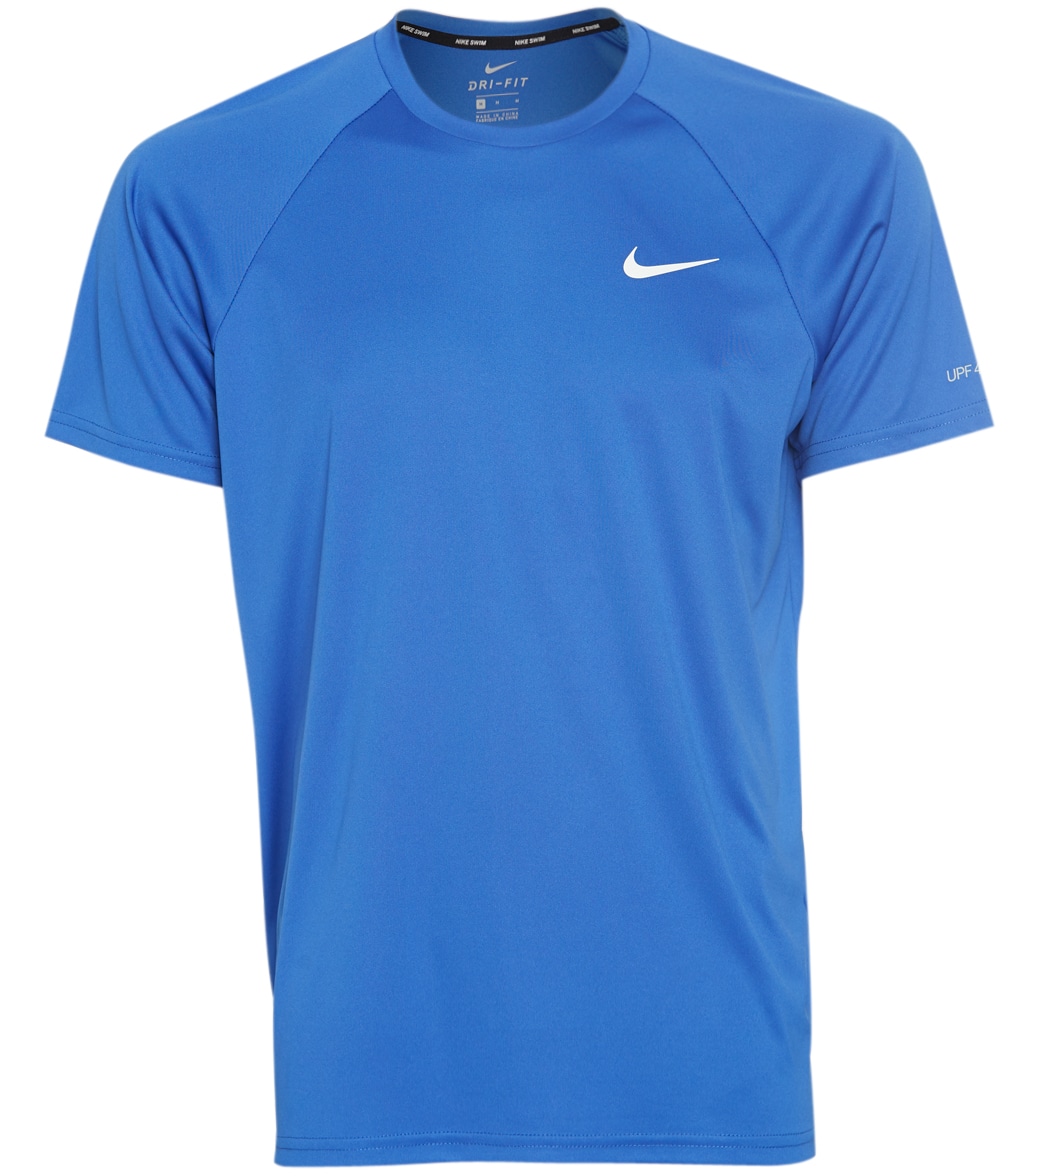 Nike Men's Essential Short Sleeve Hydroguard Shirt - Game Royal Small Polyester - Swimoutlet.com